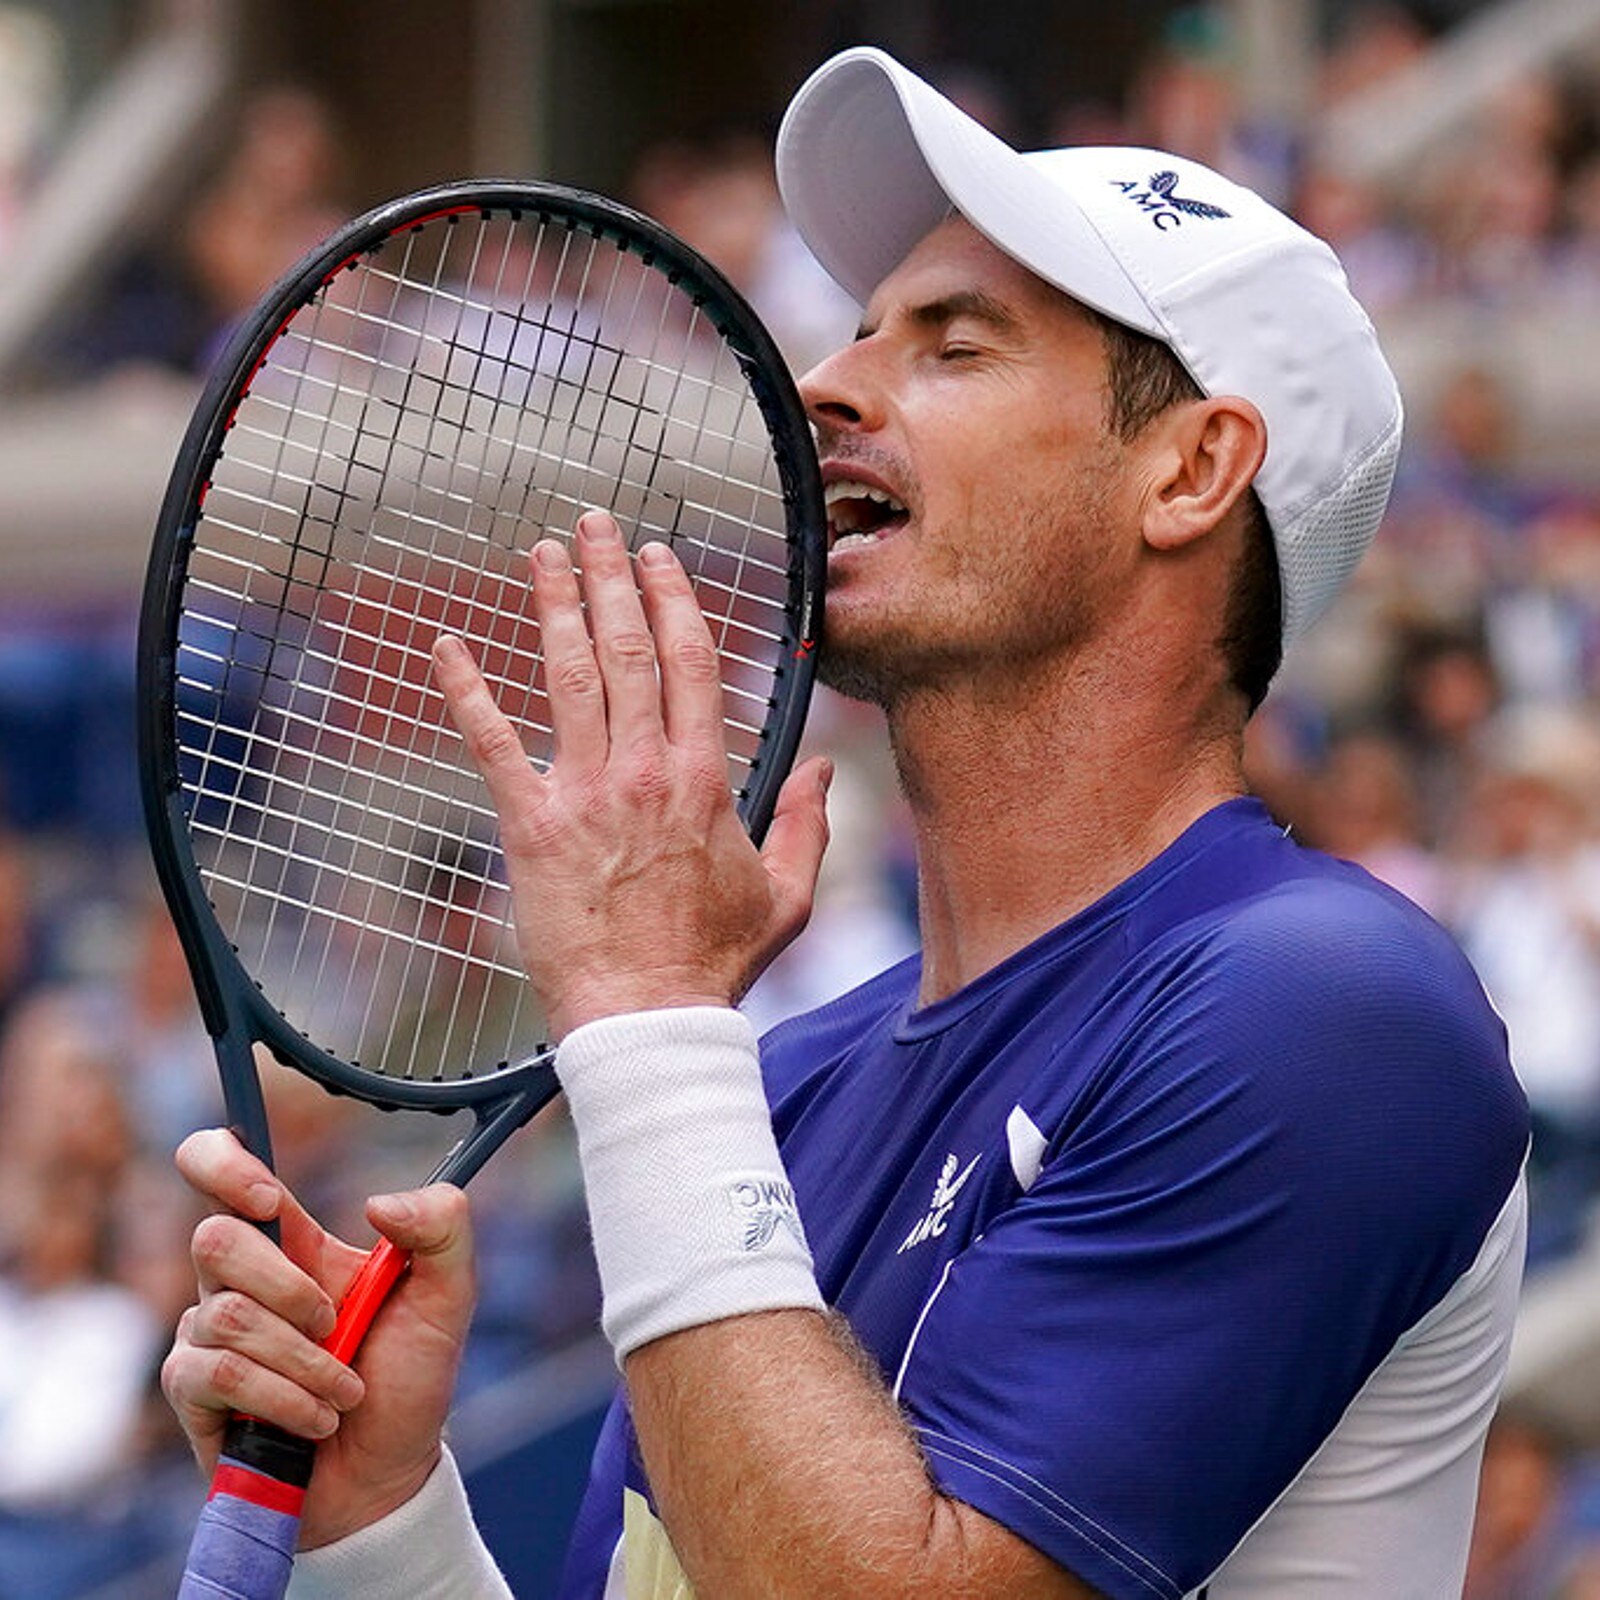 Malayall Andy Six Videos - US Open 2022: Andy Murray Ousted by Matteo Berrettini in Third Round